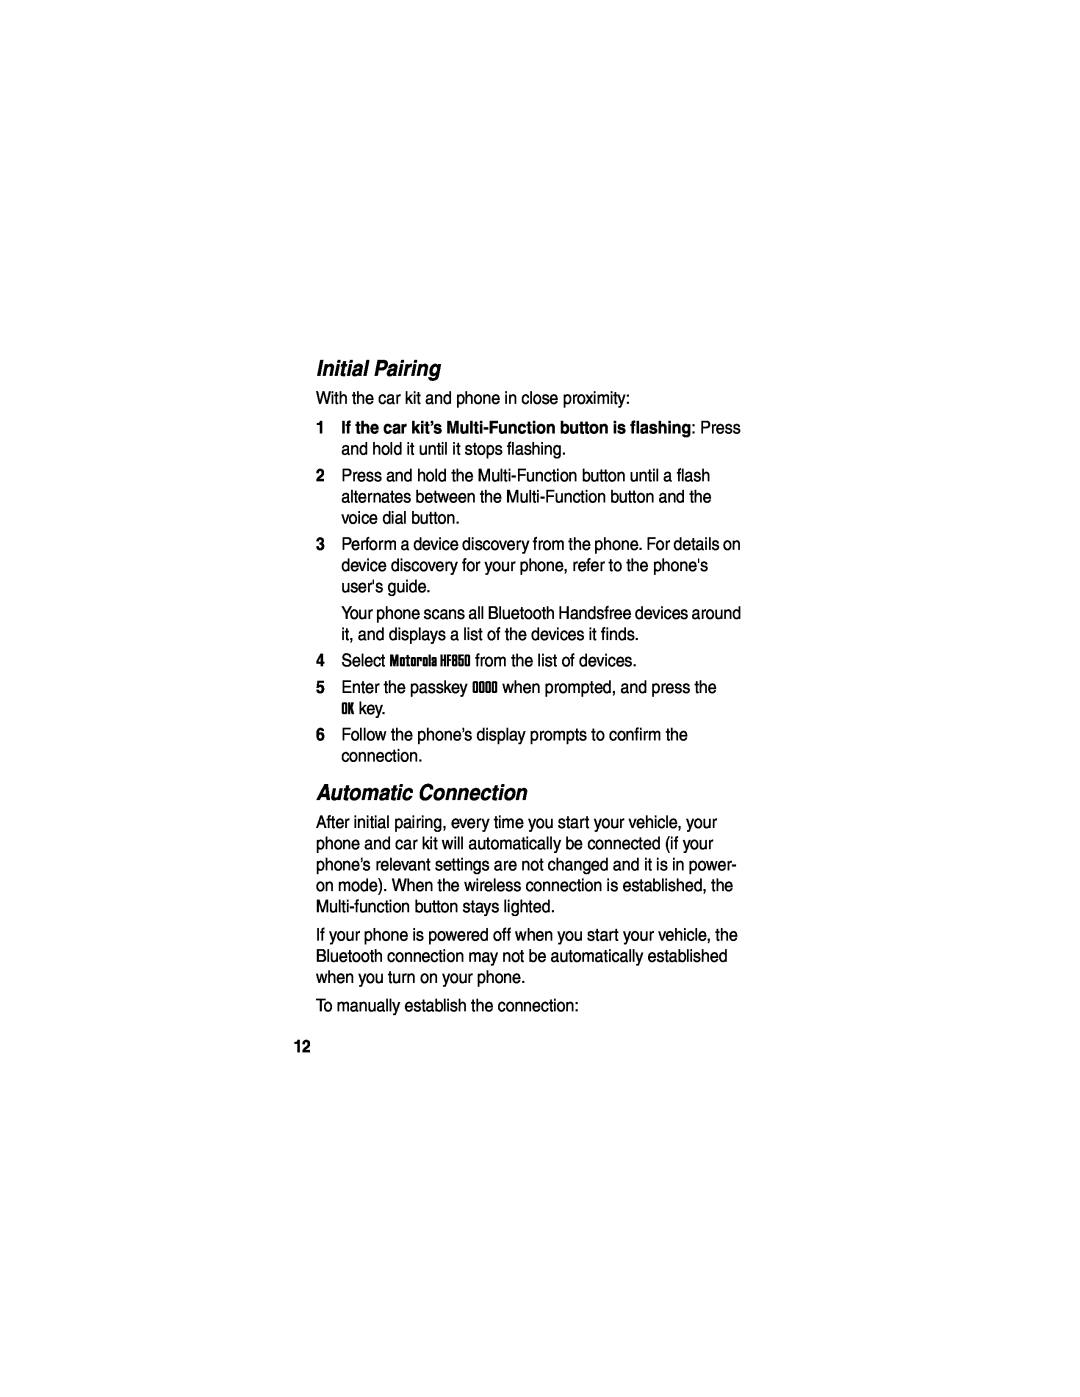 Motorola HF850 manual Initial Pairing, Automatic Connection 